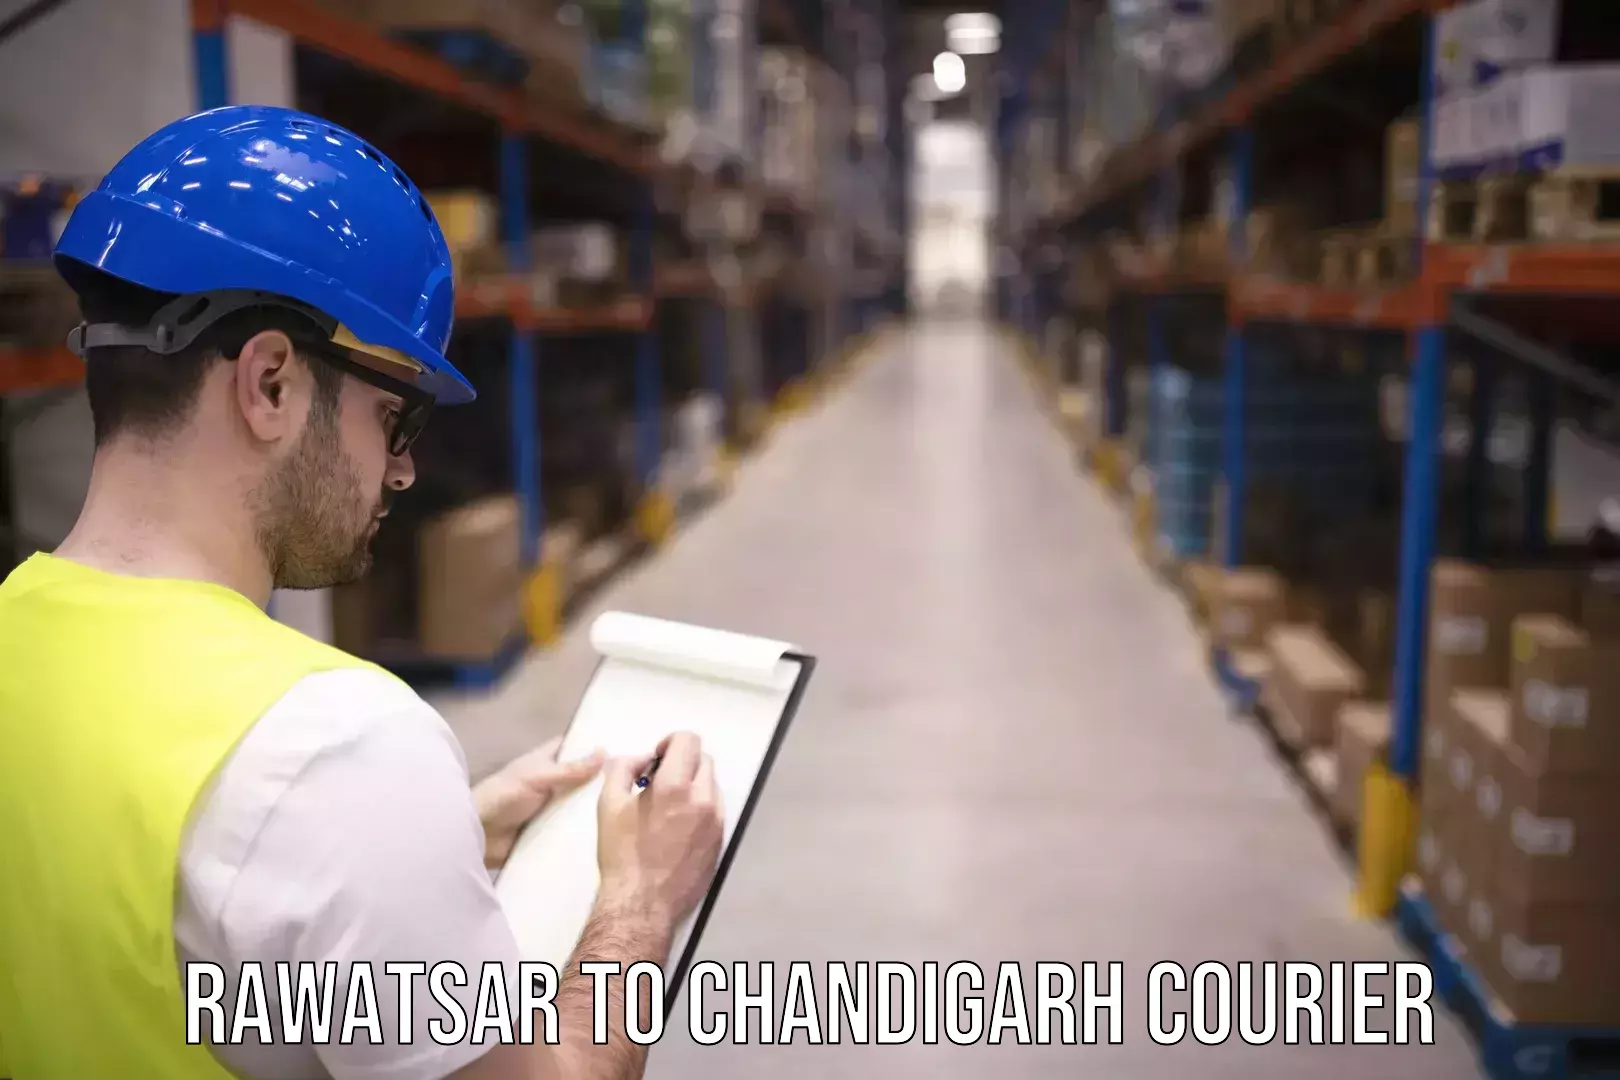 Easy access courier services Rawatsar to Chandigarh